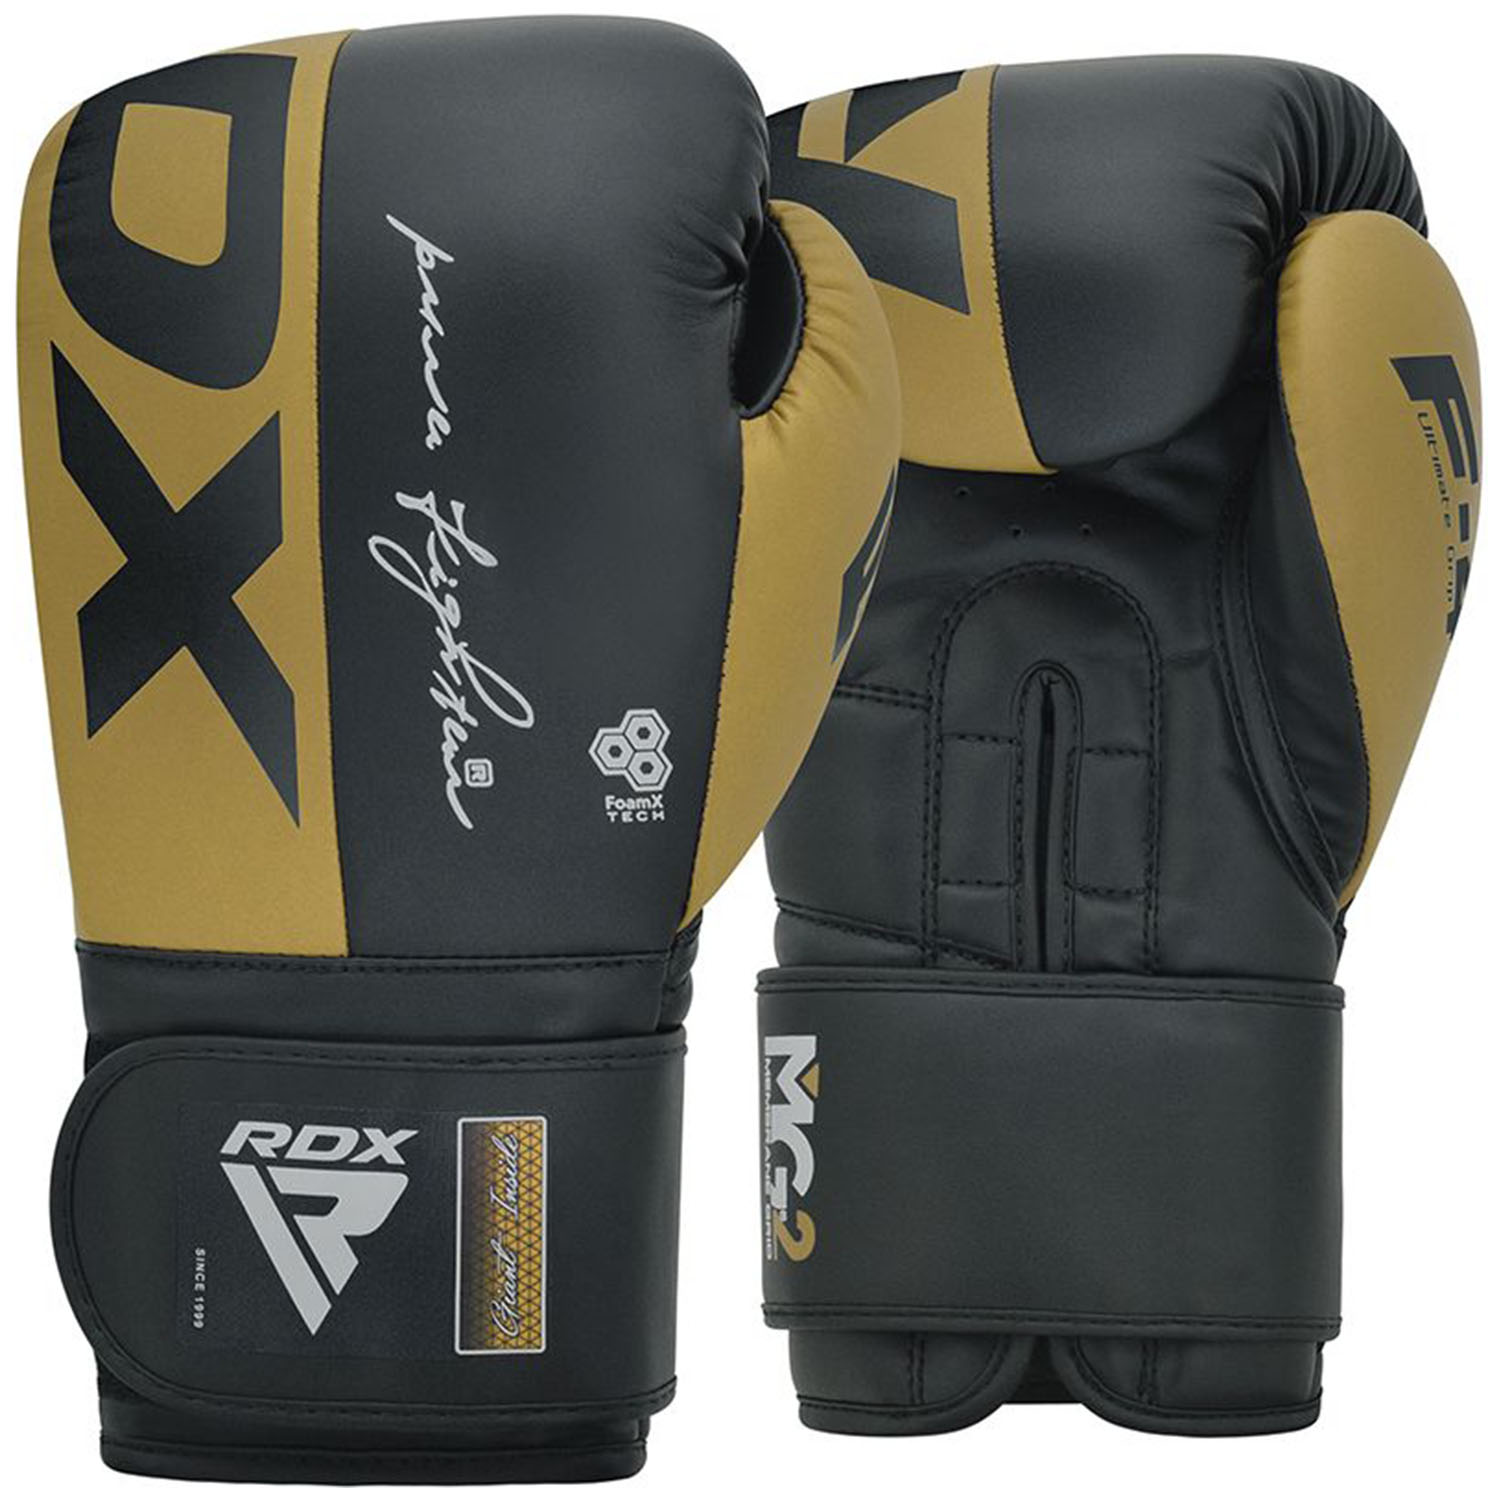 with shop with now for Gloves - beginners low great perfect Boxing quality and price